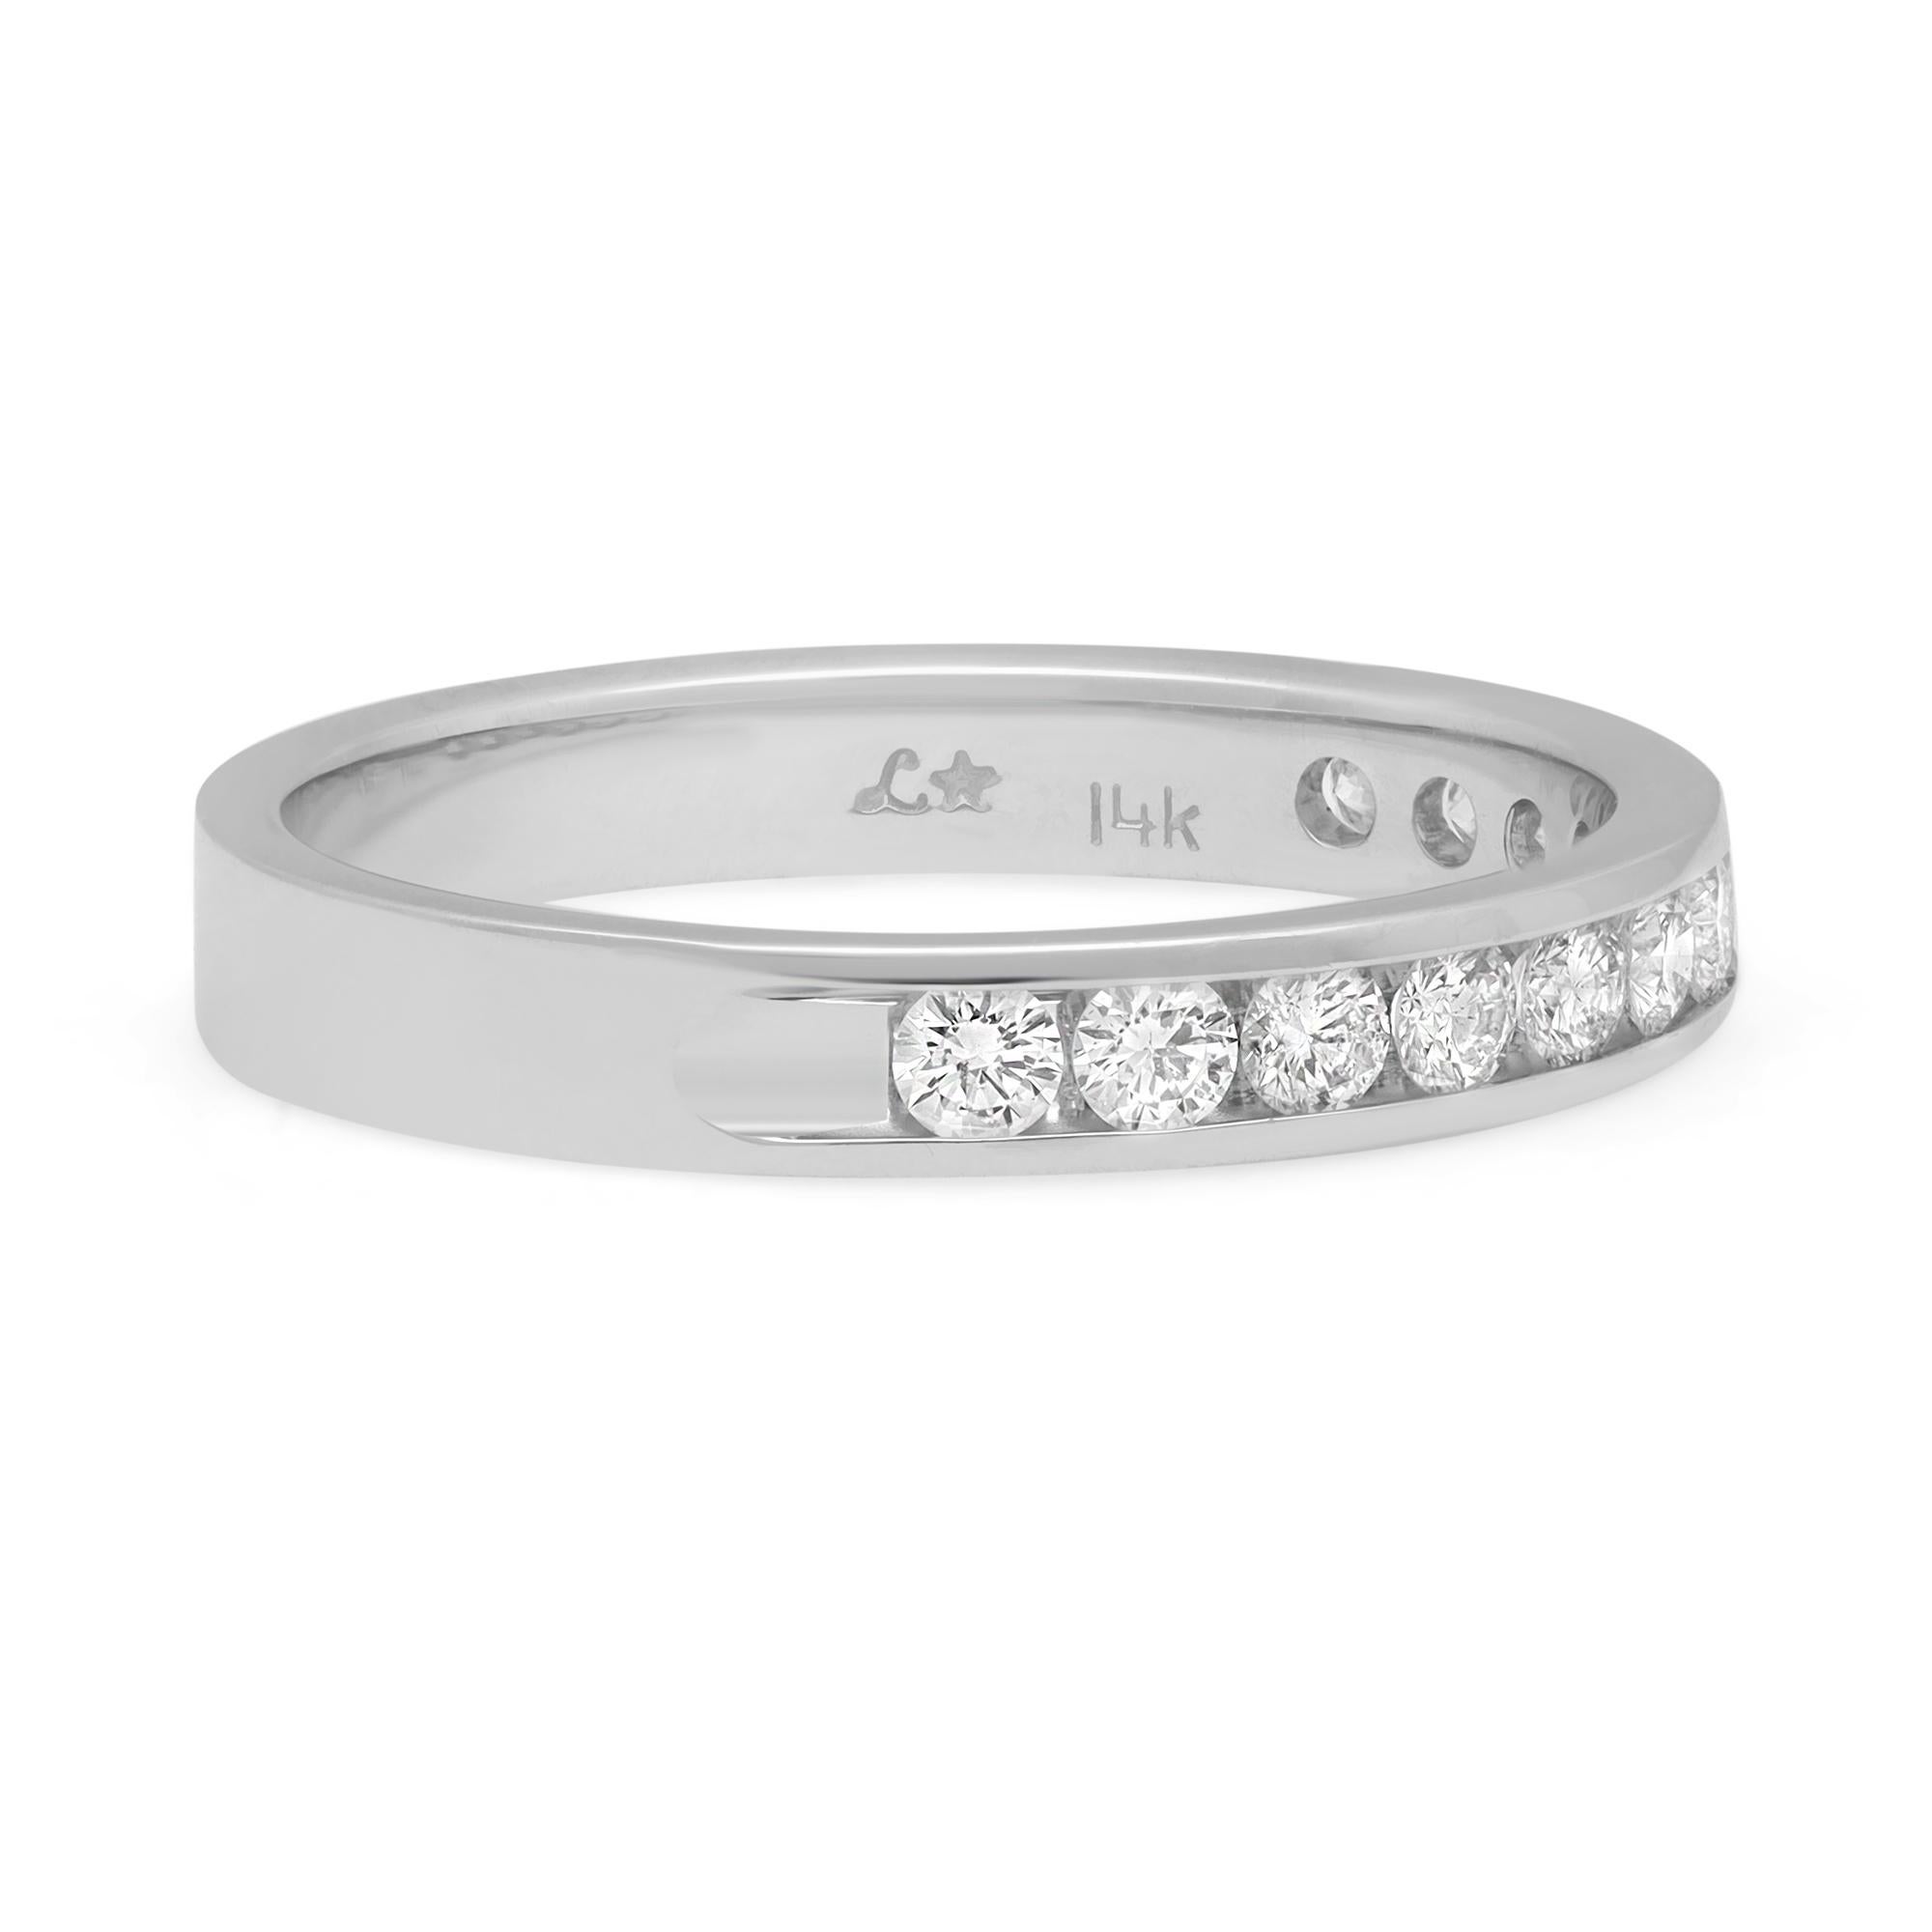 Timeless and stylish diamond wedding band ring. Crafted in fine high polished 14k white gold. This ring features 12 dazzling round brilliant cut diamonds in channel setting. Perfect for a gift or as a promise ring. Total diamond weight: 0.60 carat.